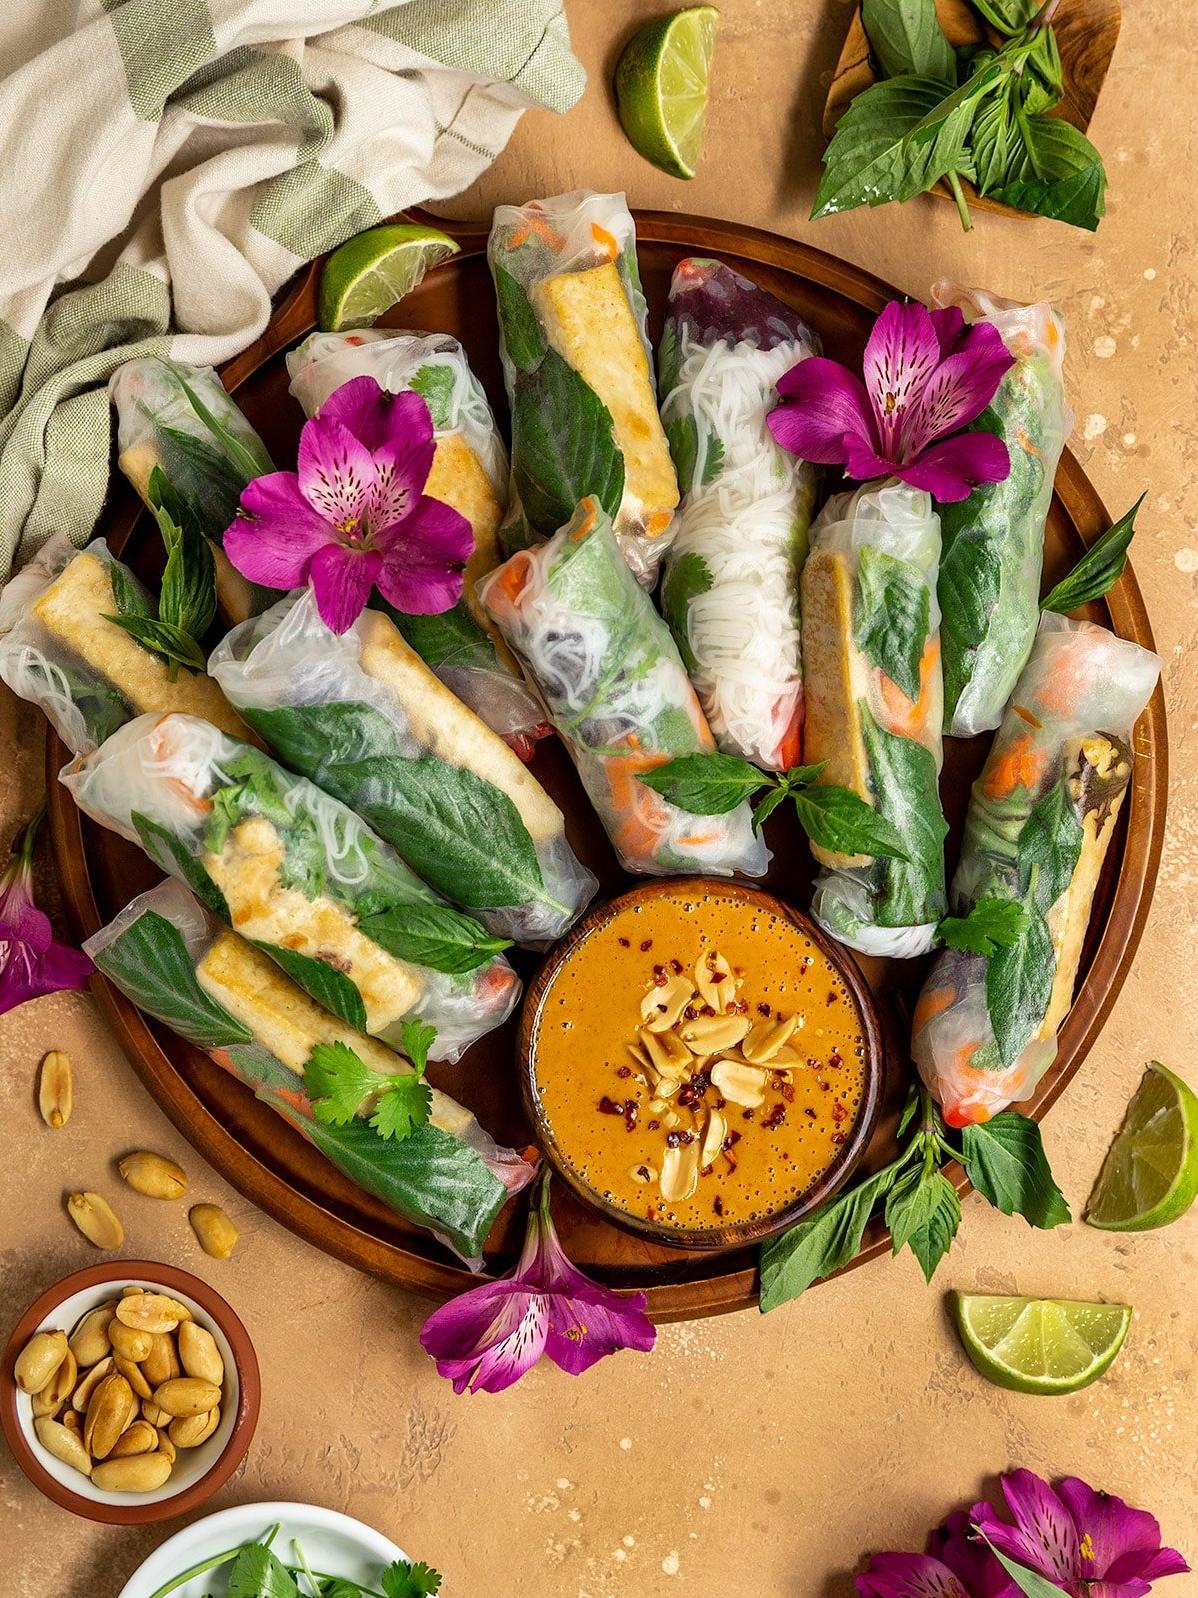  Light, crispy and refreshing - the perfect description for this Vietnamese spring roll recipe.